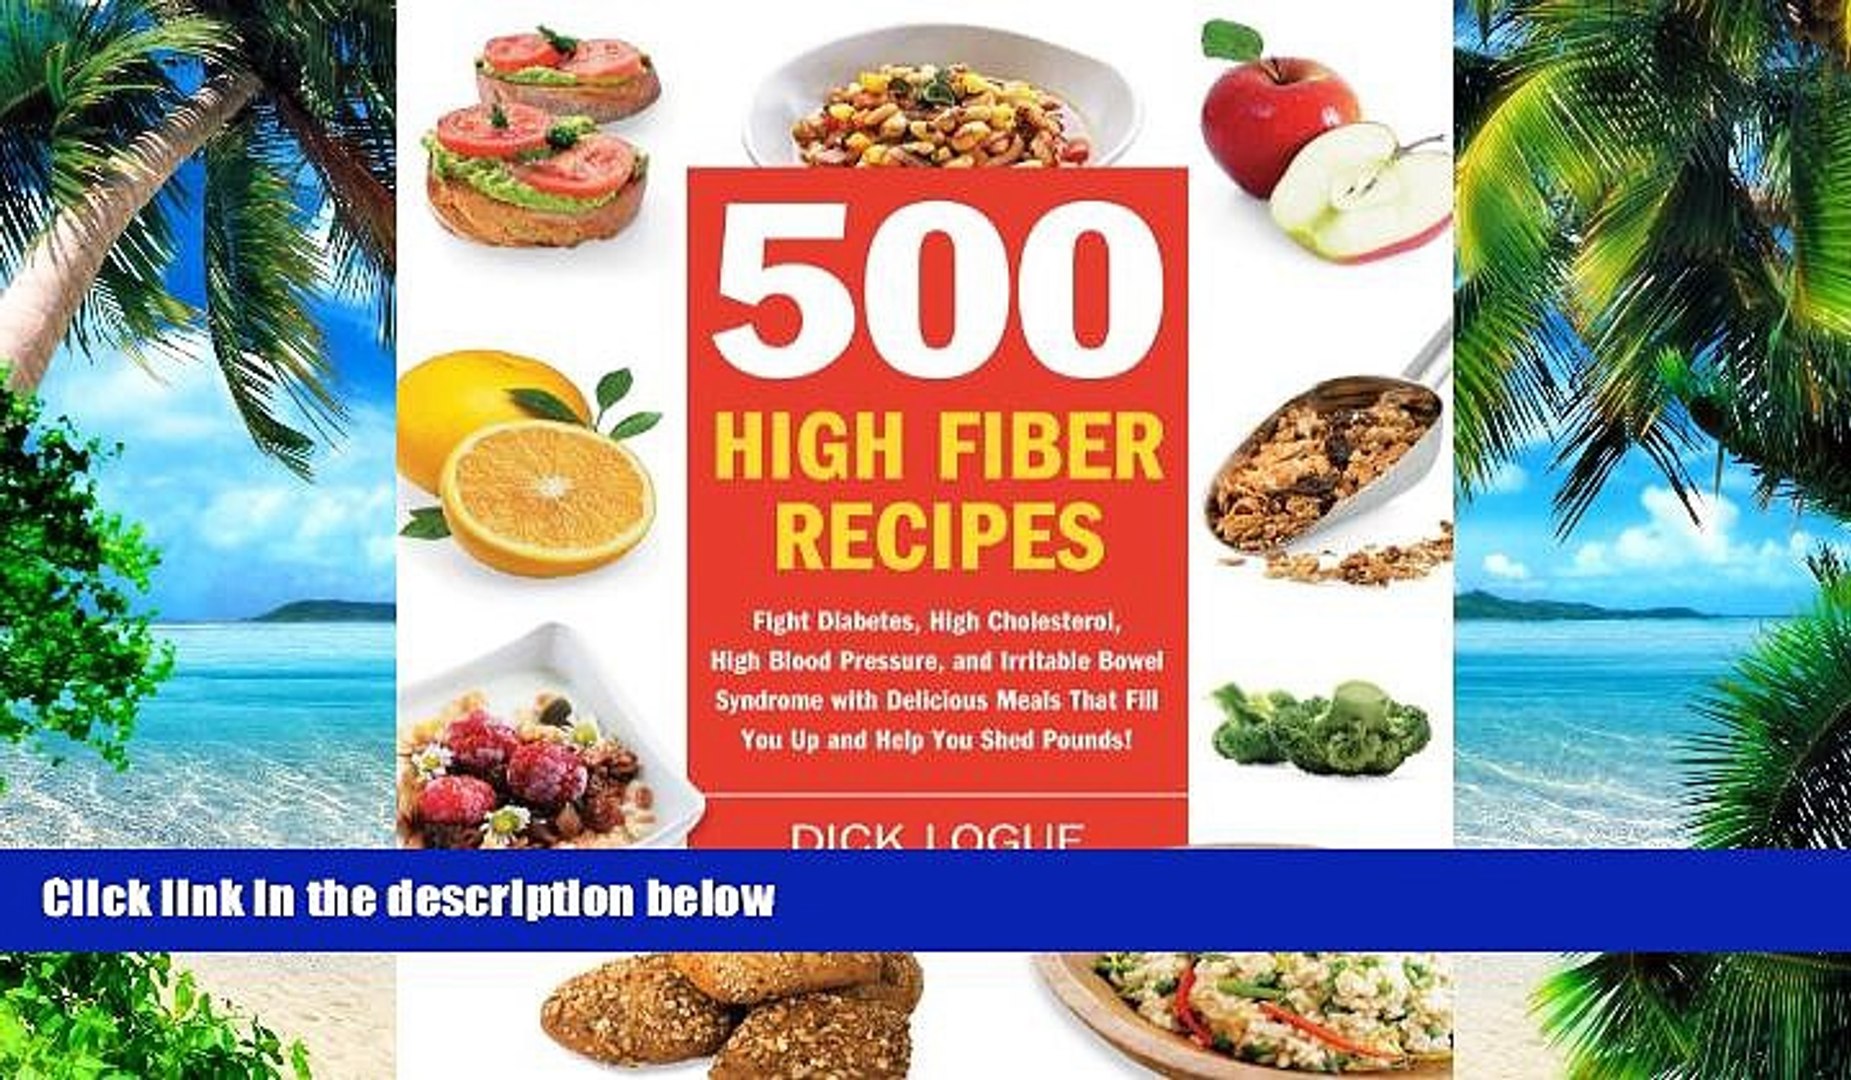 Diabetes High Cholesterol Diet Recipes - The Guide Ways